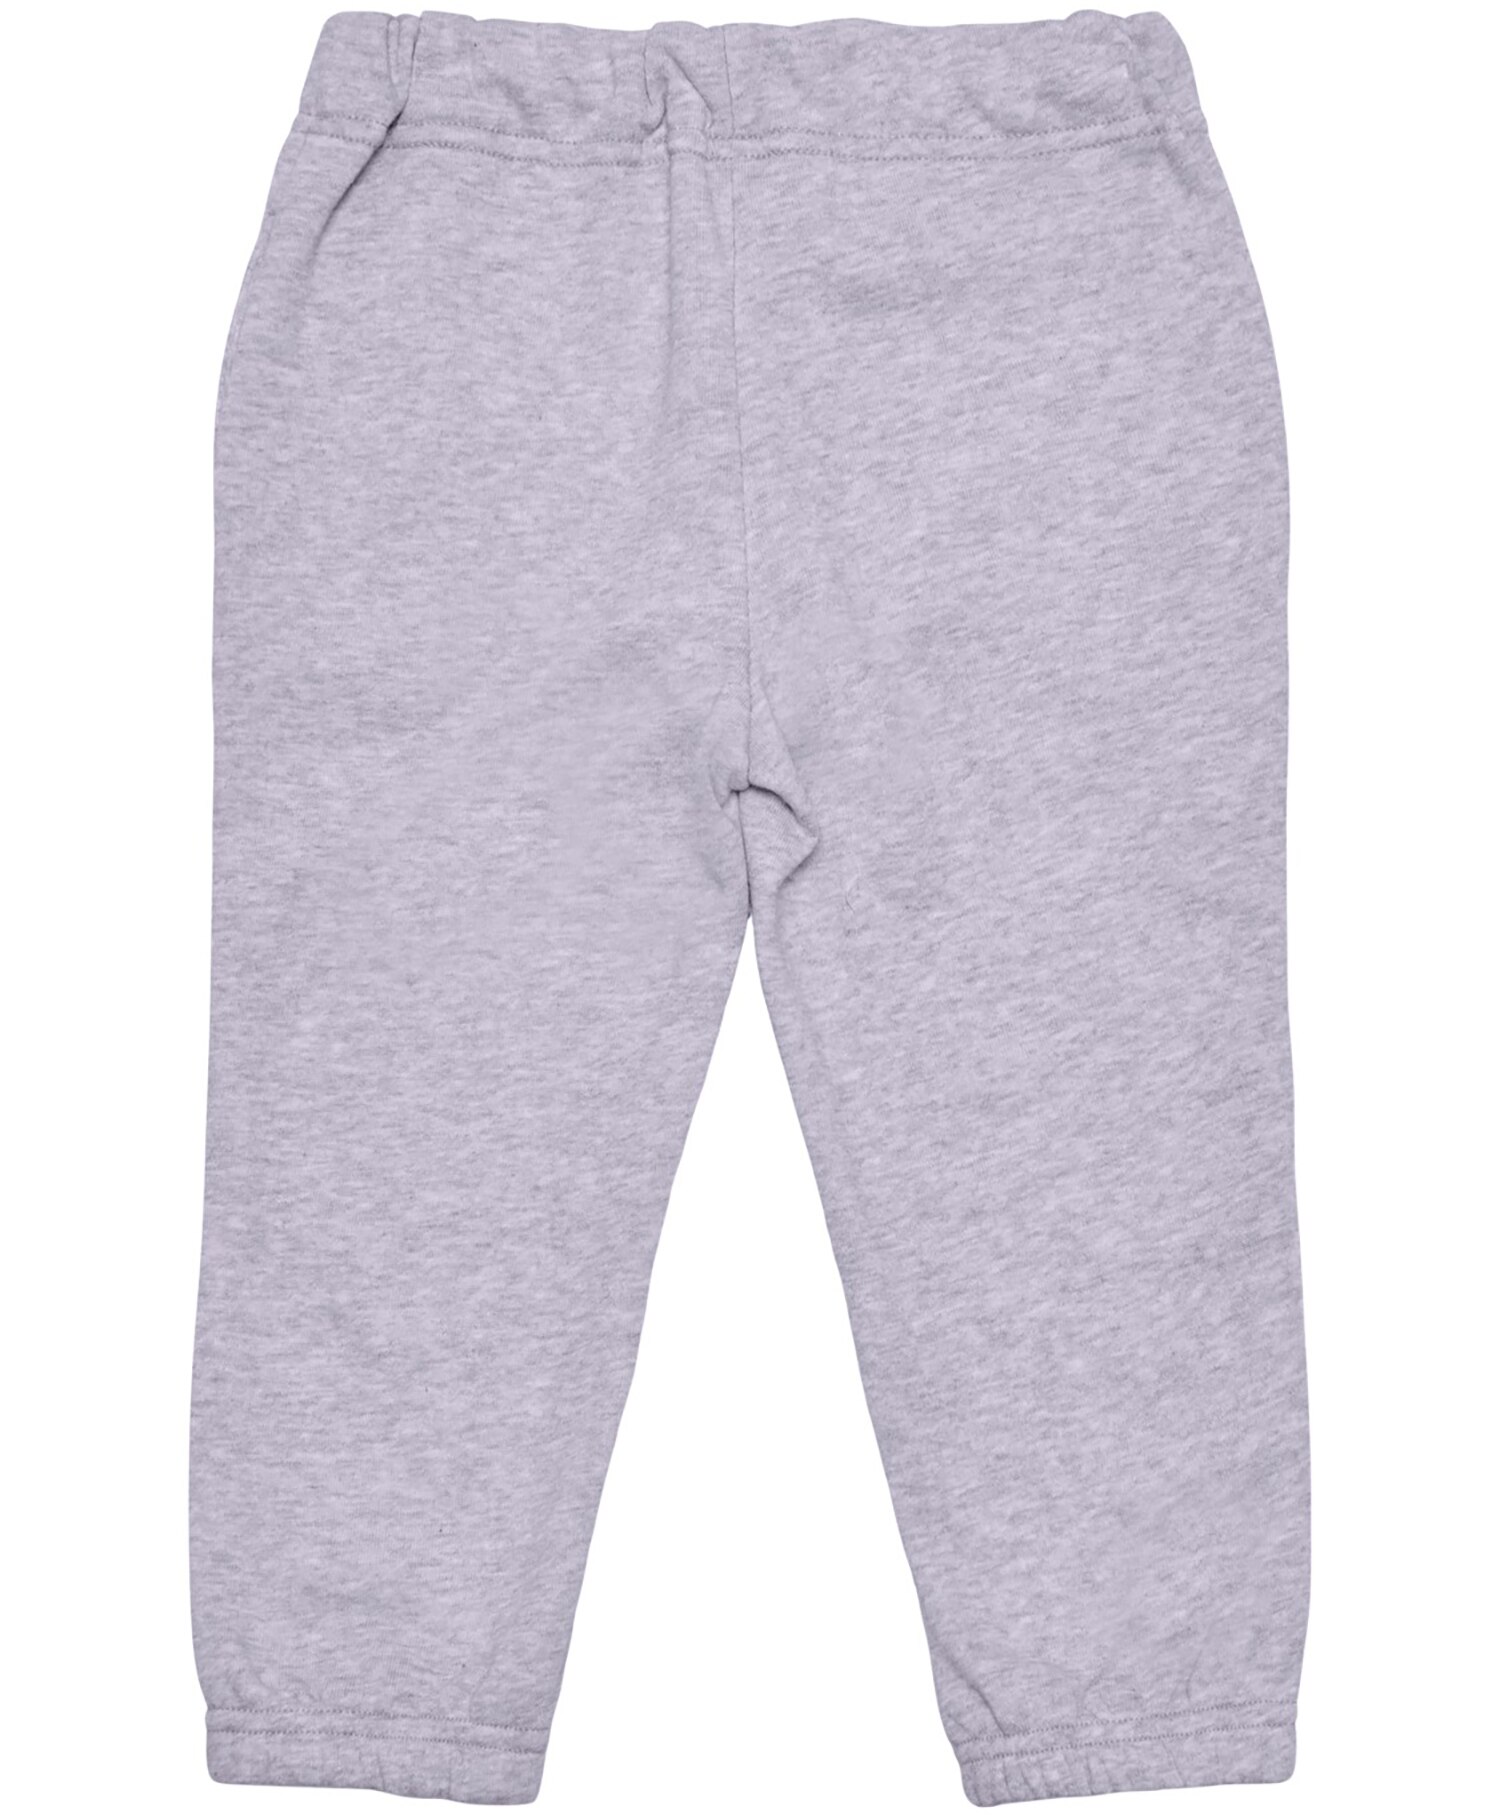 Only kids pull up pant mini